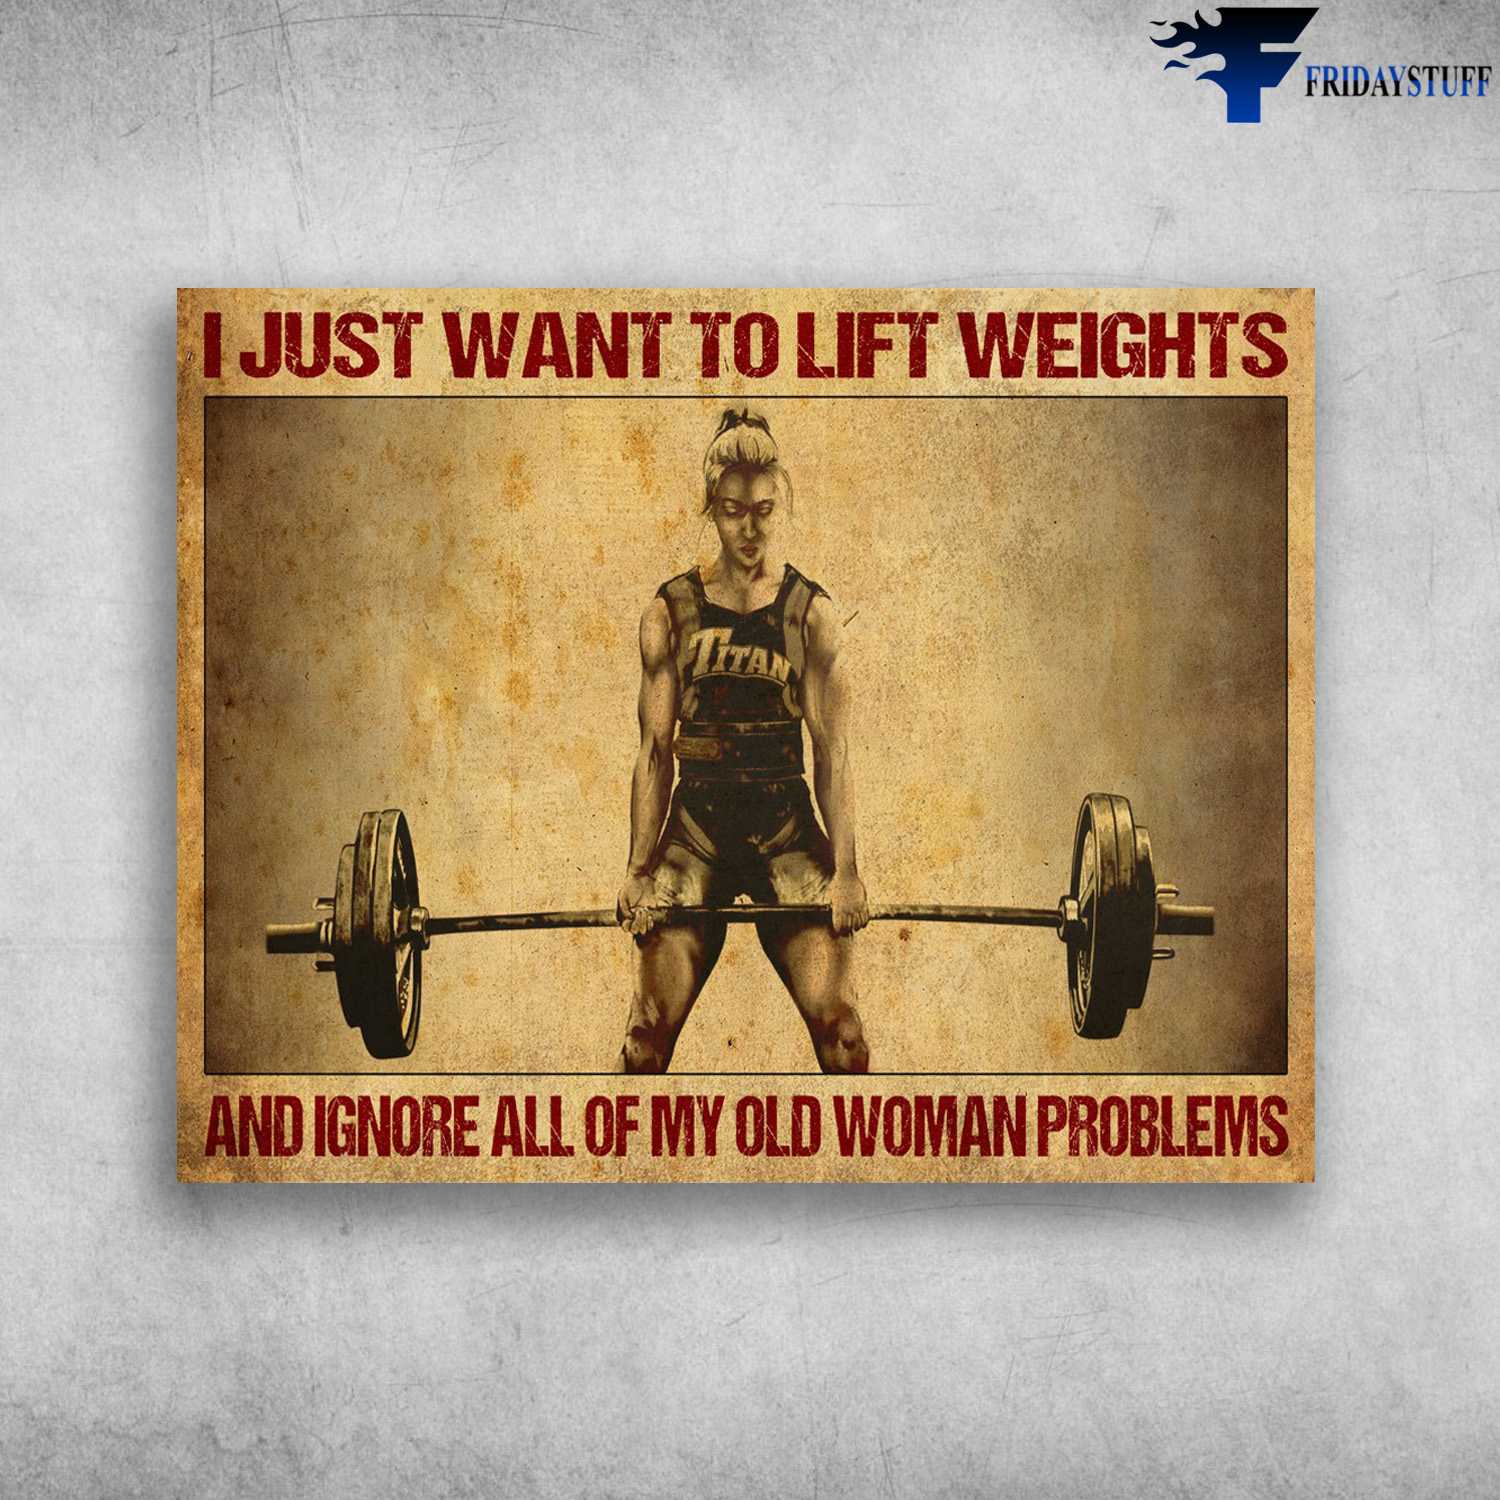 Gym Girl, Weightlifting Girl, I Am Beautiful, I Just Want To Life Weights, And Ignore All Of My Old Woman Problems